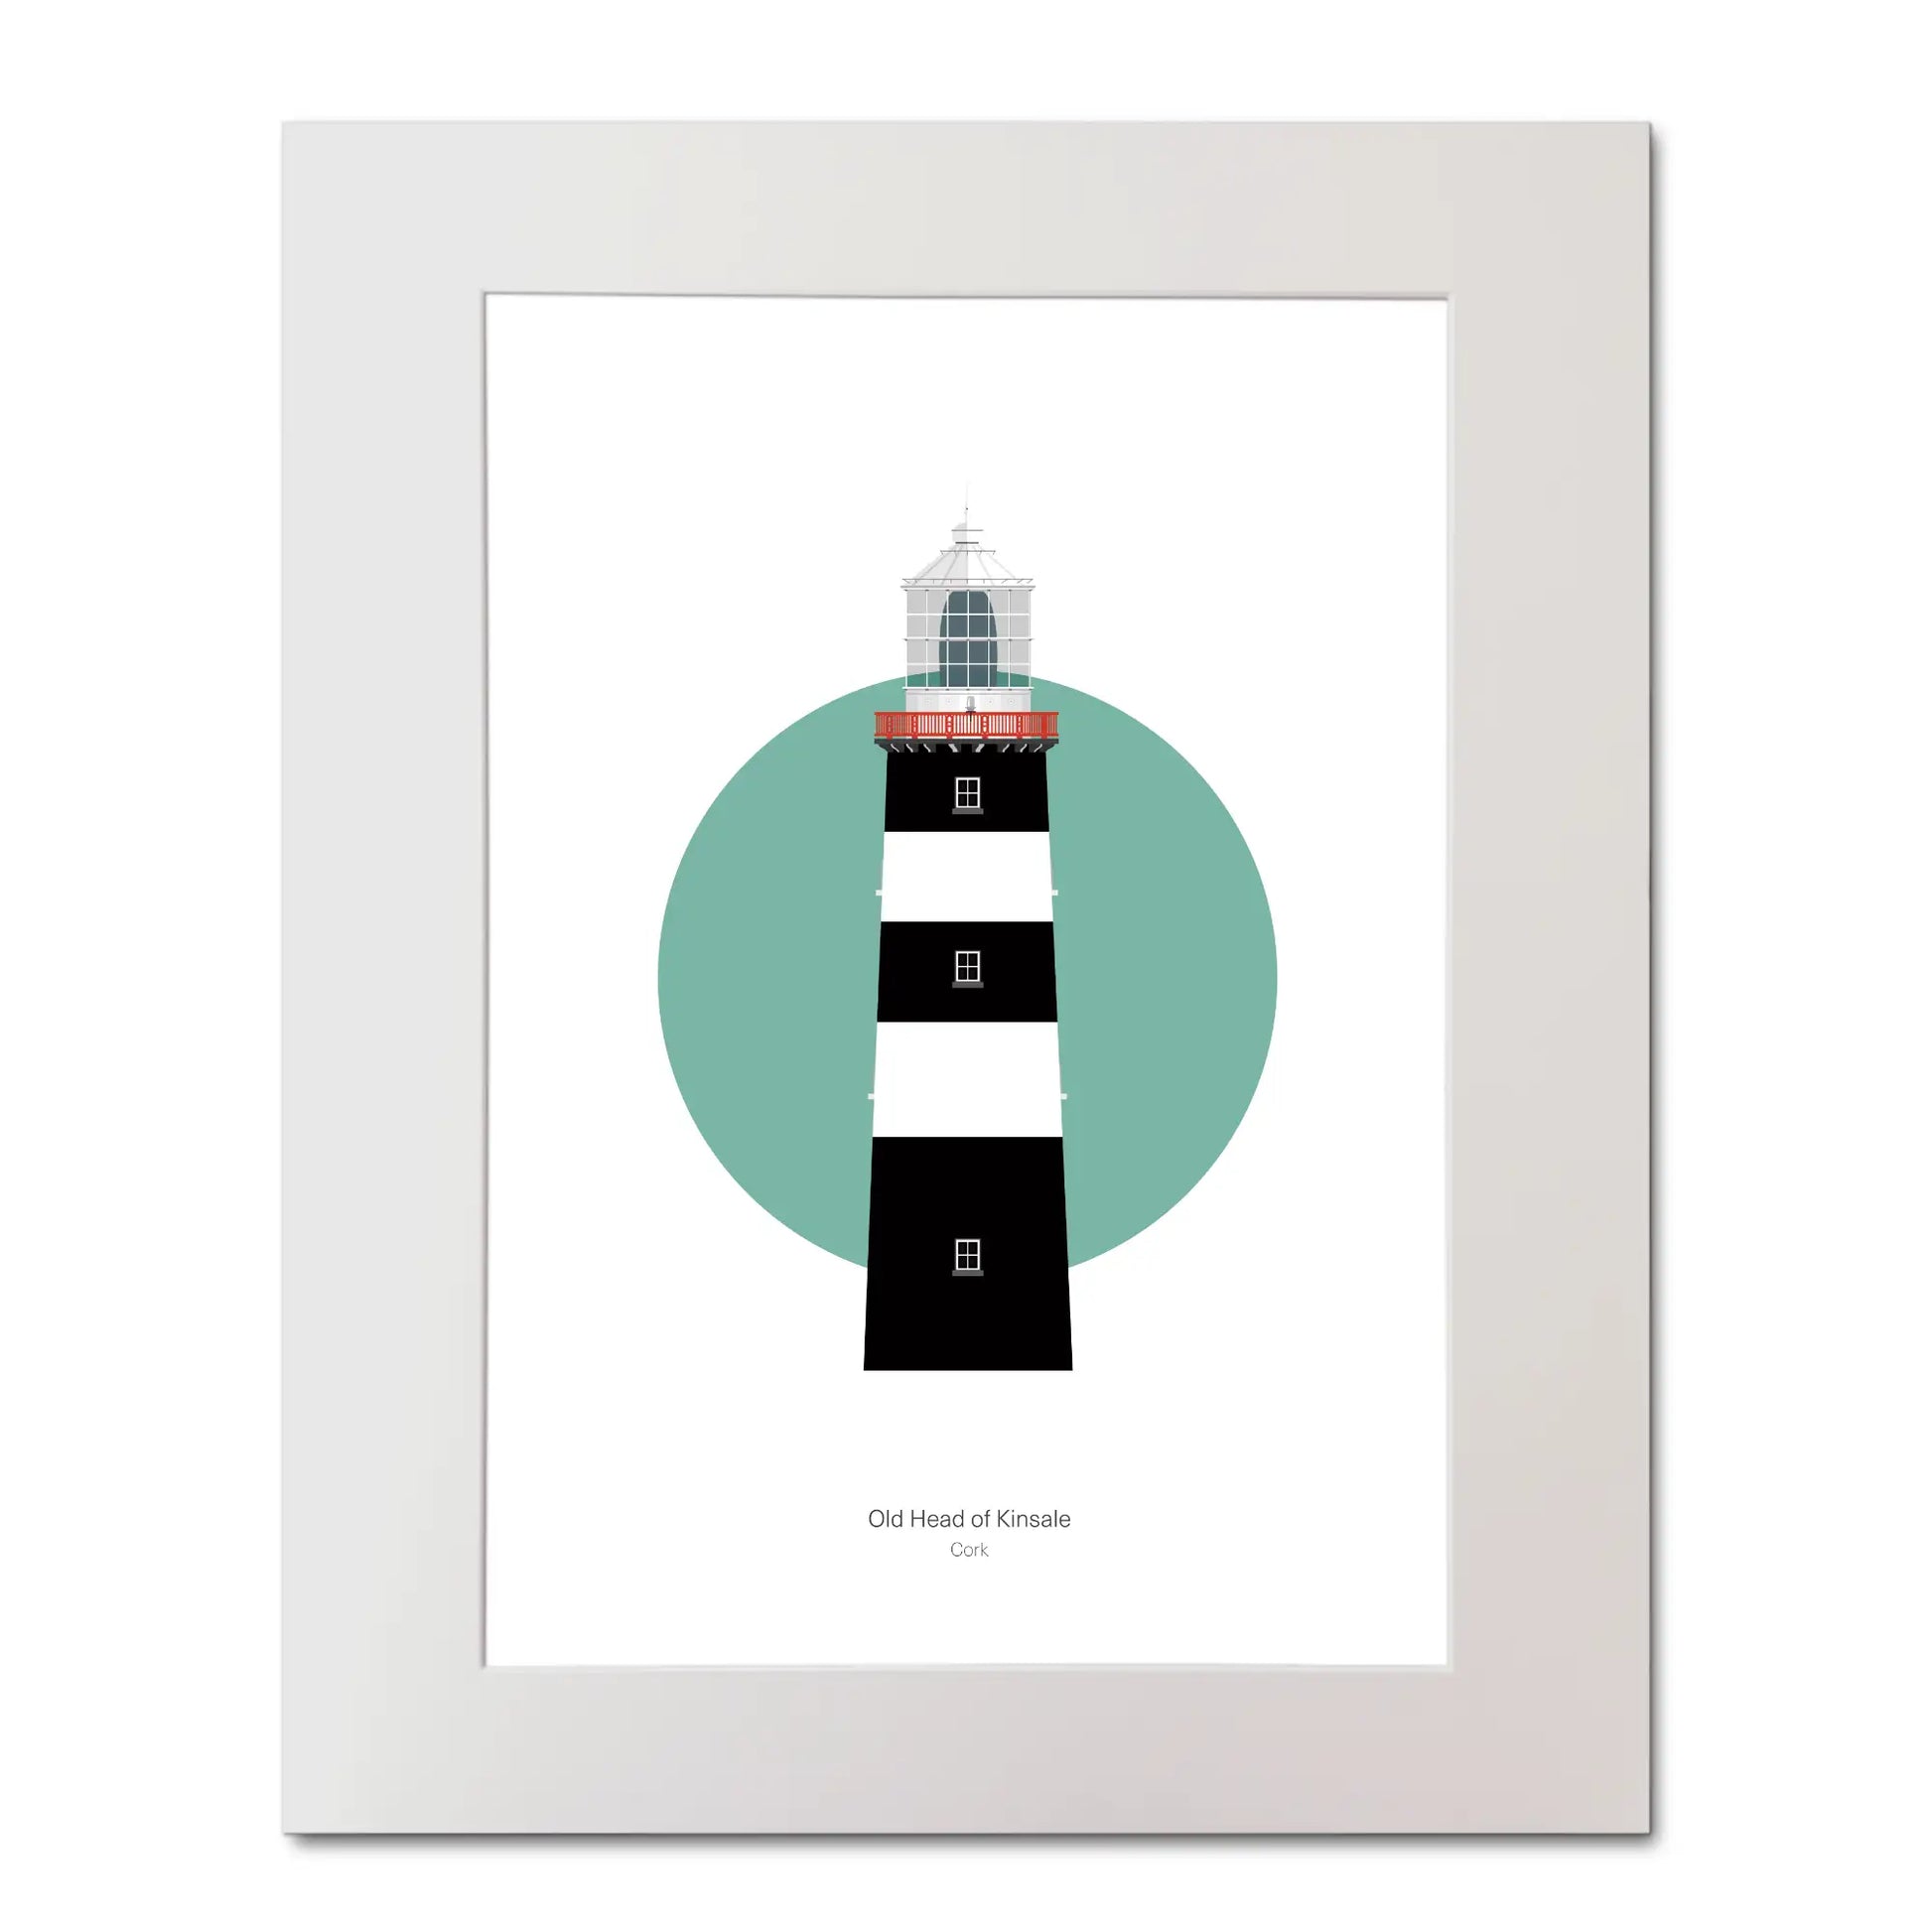 Illustration of Old Head of Kinsale lighthouse on a white background inside light blue square, mounted and measuring 40x50cm.